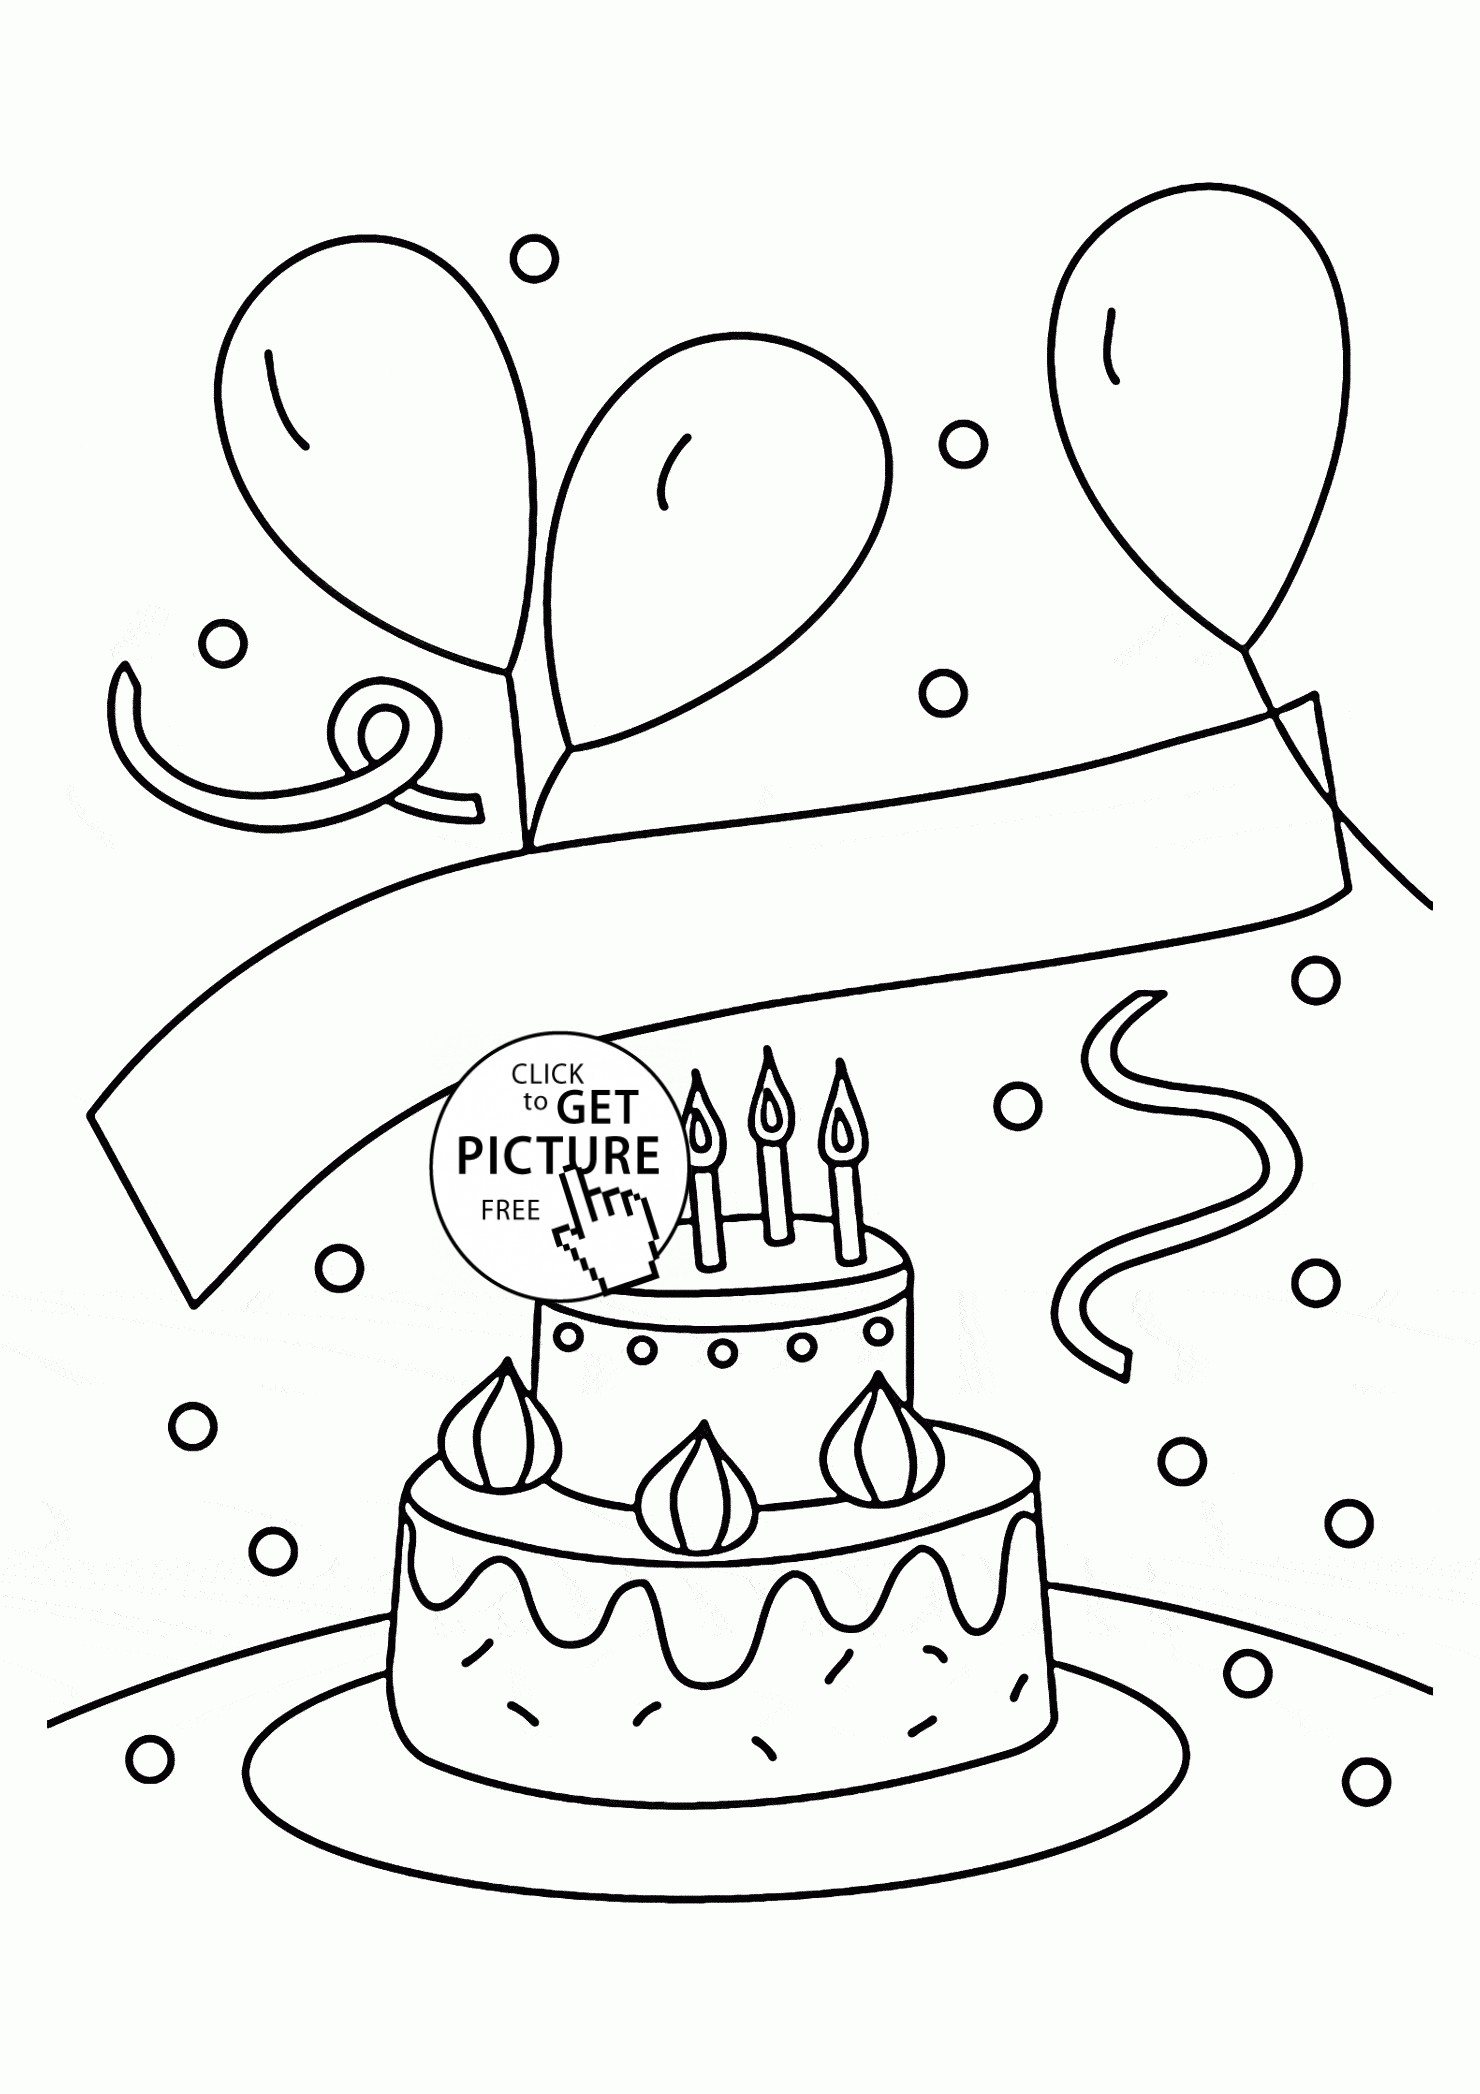 Birthday Balloon Coloring Pages at GetColorings.com | Free ...